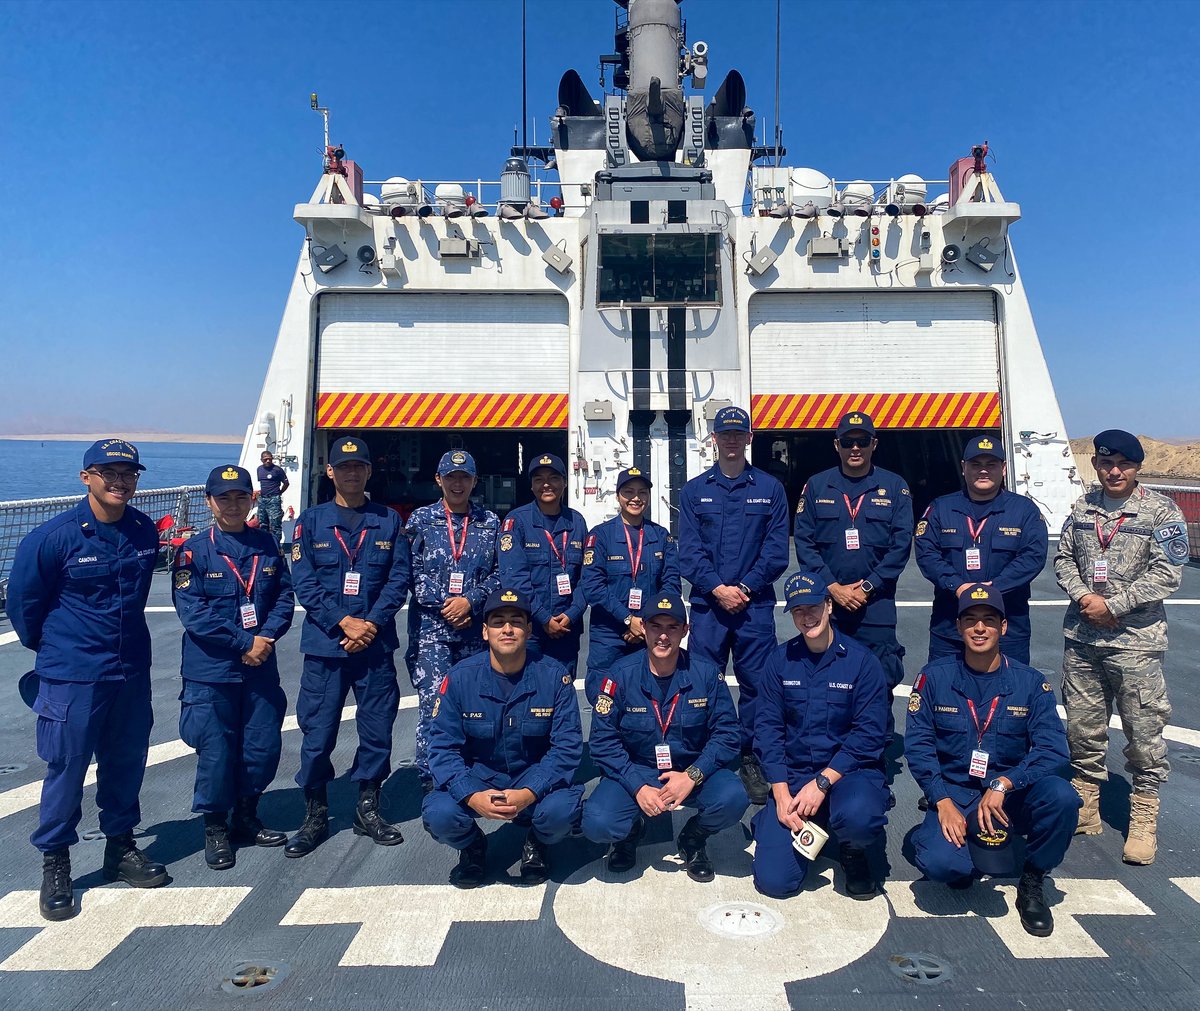 This week, members of #USCG Cutter Munro hosted a cutter tour with junior officers from the Peruvian, Mexican, and Bolivian Navy. Following their port visit in Pisco, Peru, the Munro's crew and Peruvian Coast Guard swiftly responded to an actual SAR case.https://t.co/O43vZ64cZu https://t.co/yyY6gsvsAg